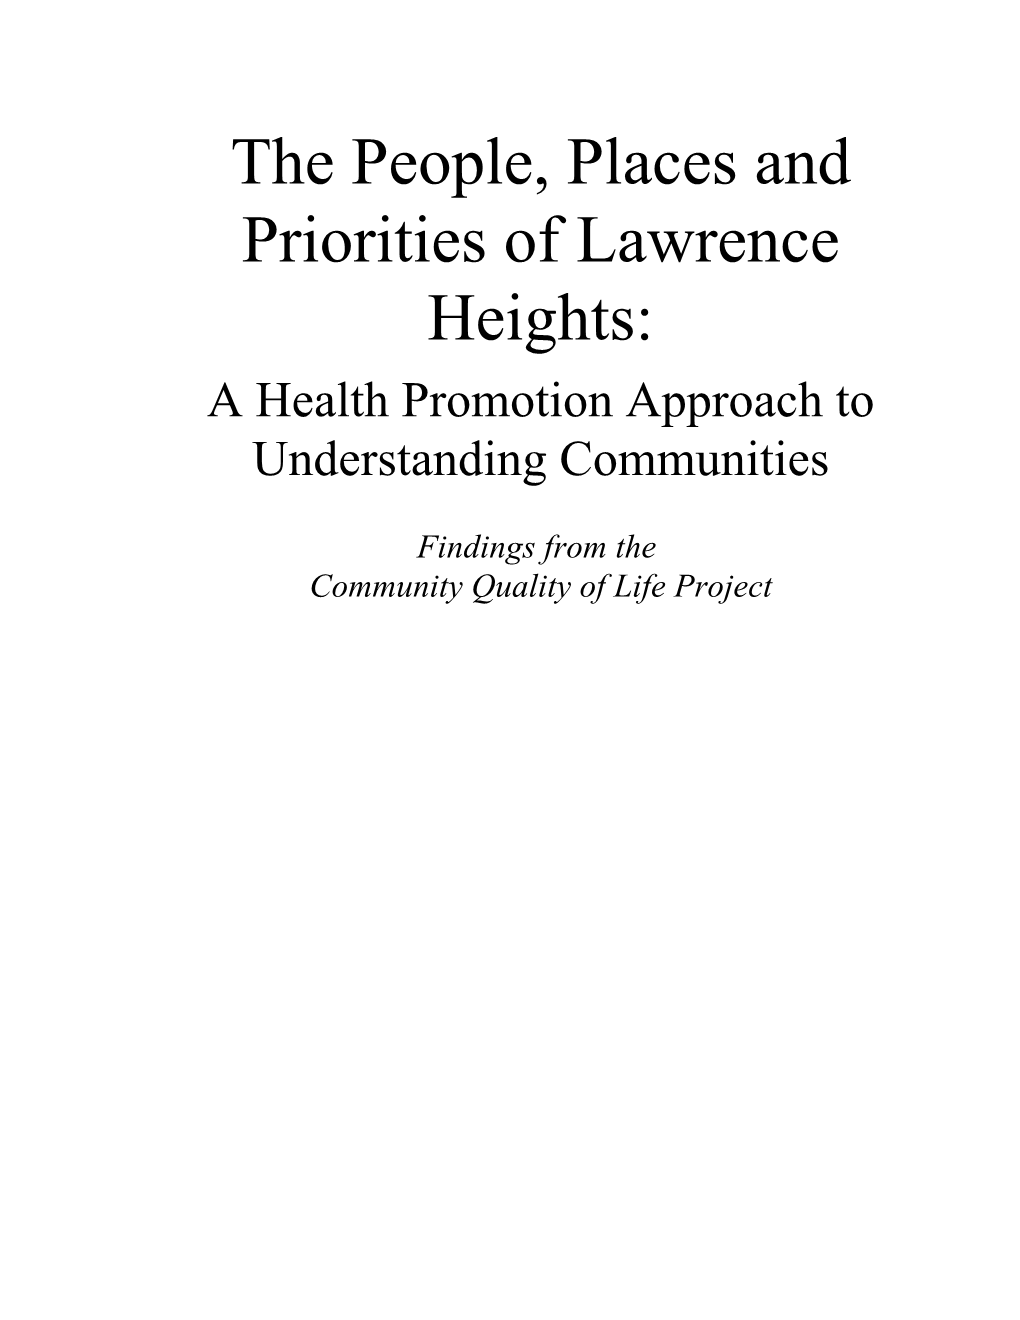 The People, Places and Priorities of Lawrence Heights: a Health Promotion Approach to Understanding Communities